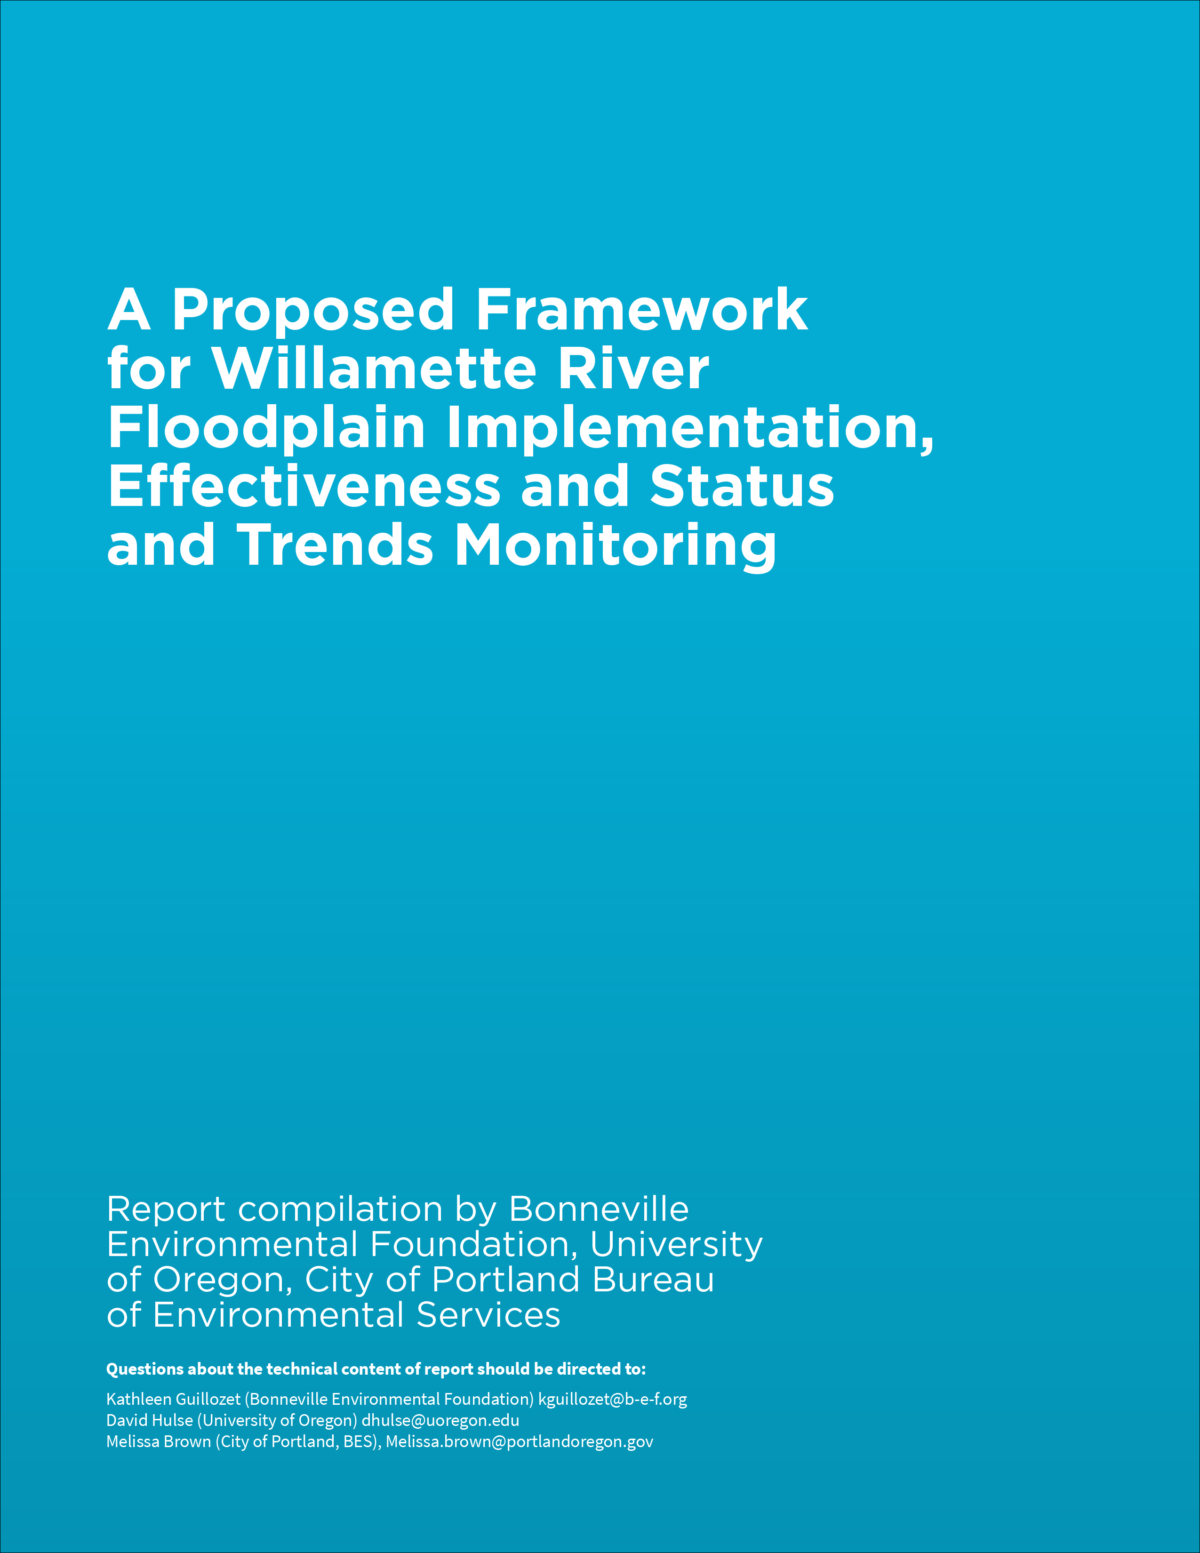 A proposed framework for willametter river floodplain implementation, effectiveness and status and trends monitoring